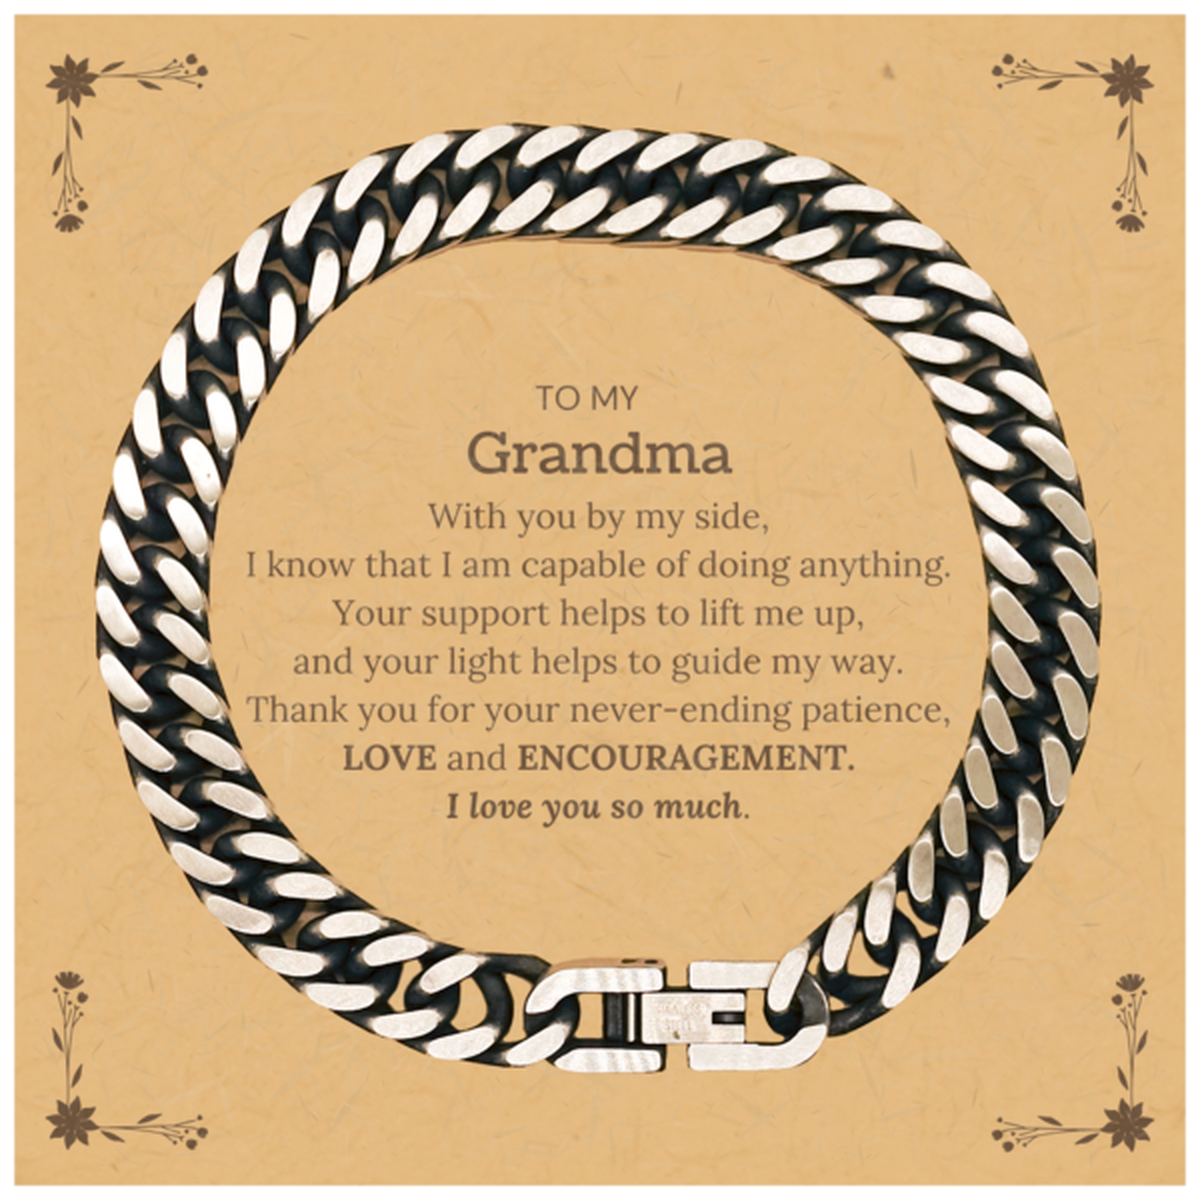 Appreciation Grandma Cuban Link Chain Bracelet Gifts, To My Grandma Birthday Christmas Wedding Keepsake Gifts for Grandma With you by my side, I know that I am capable of doing anything. I love you so much